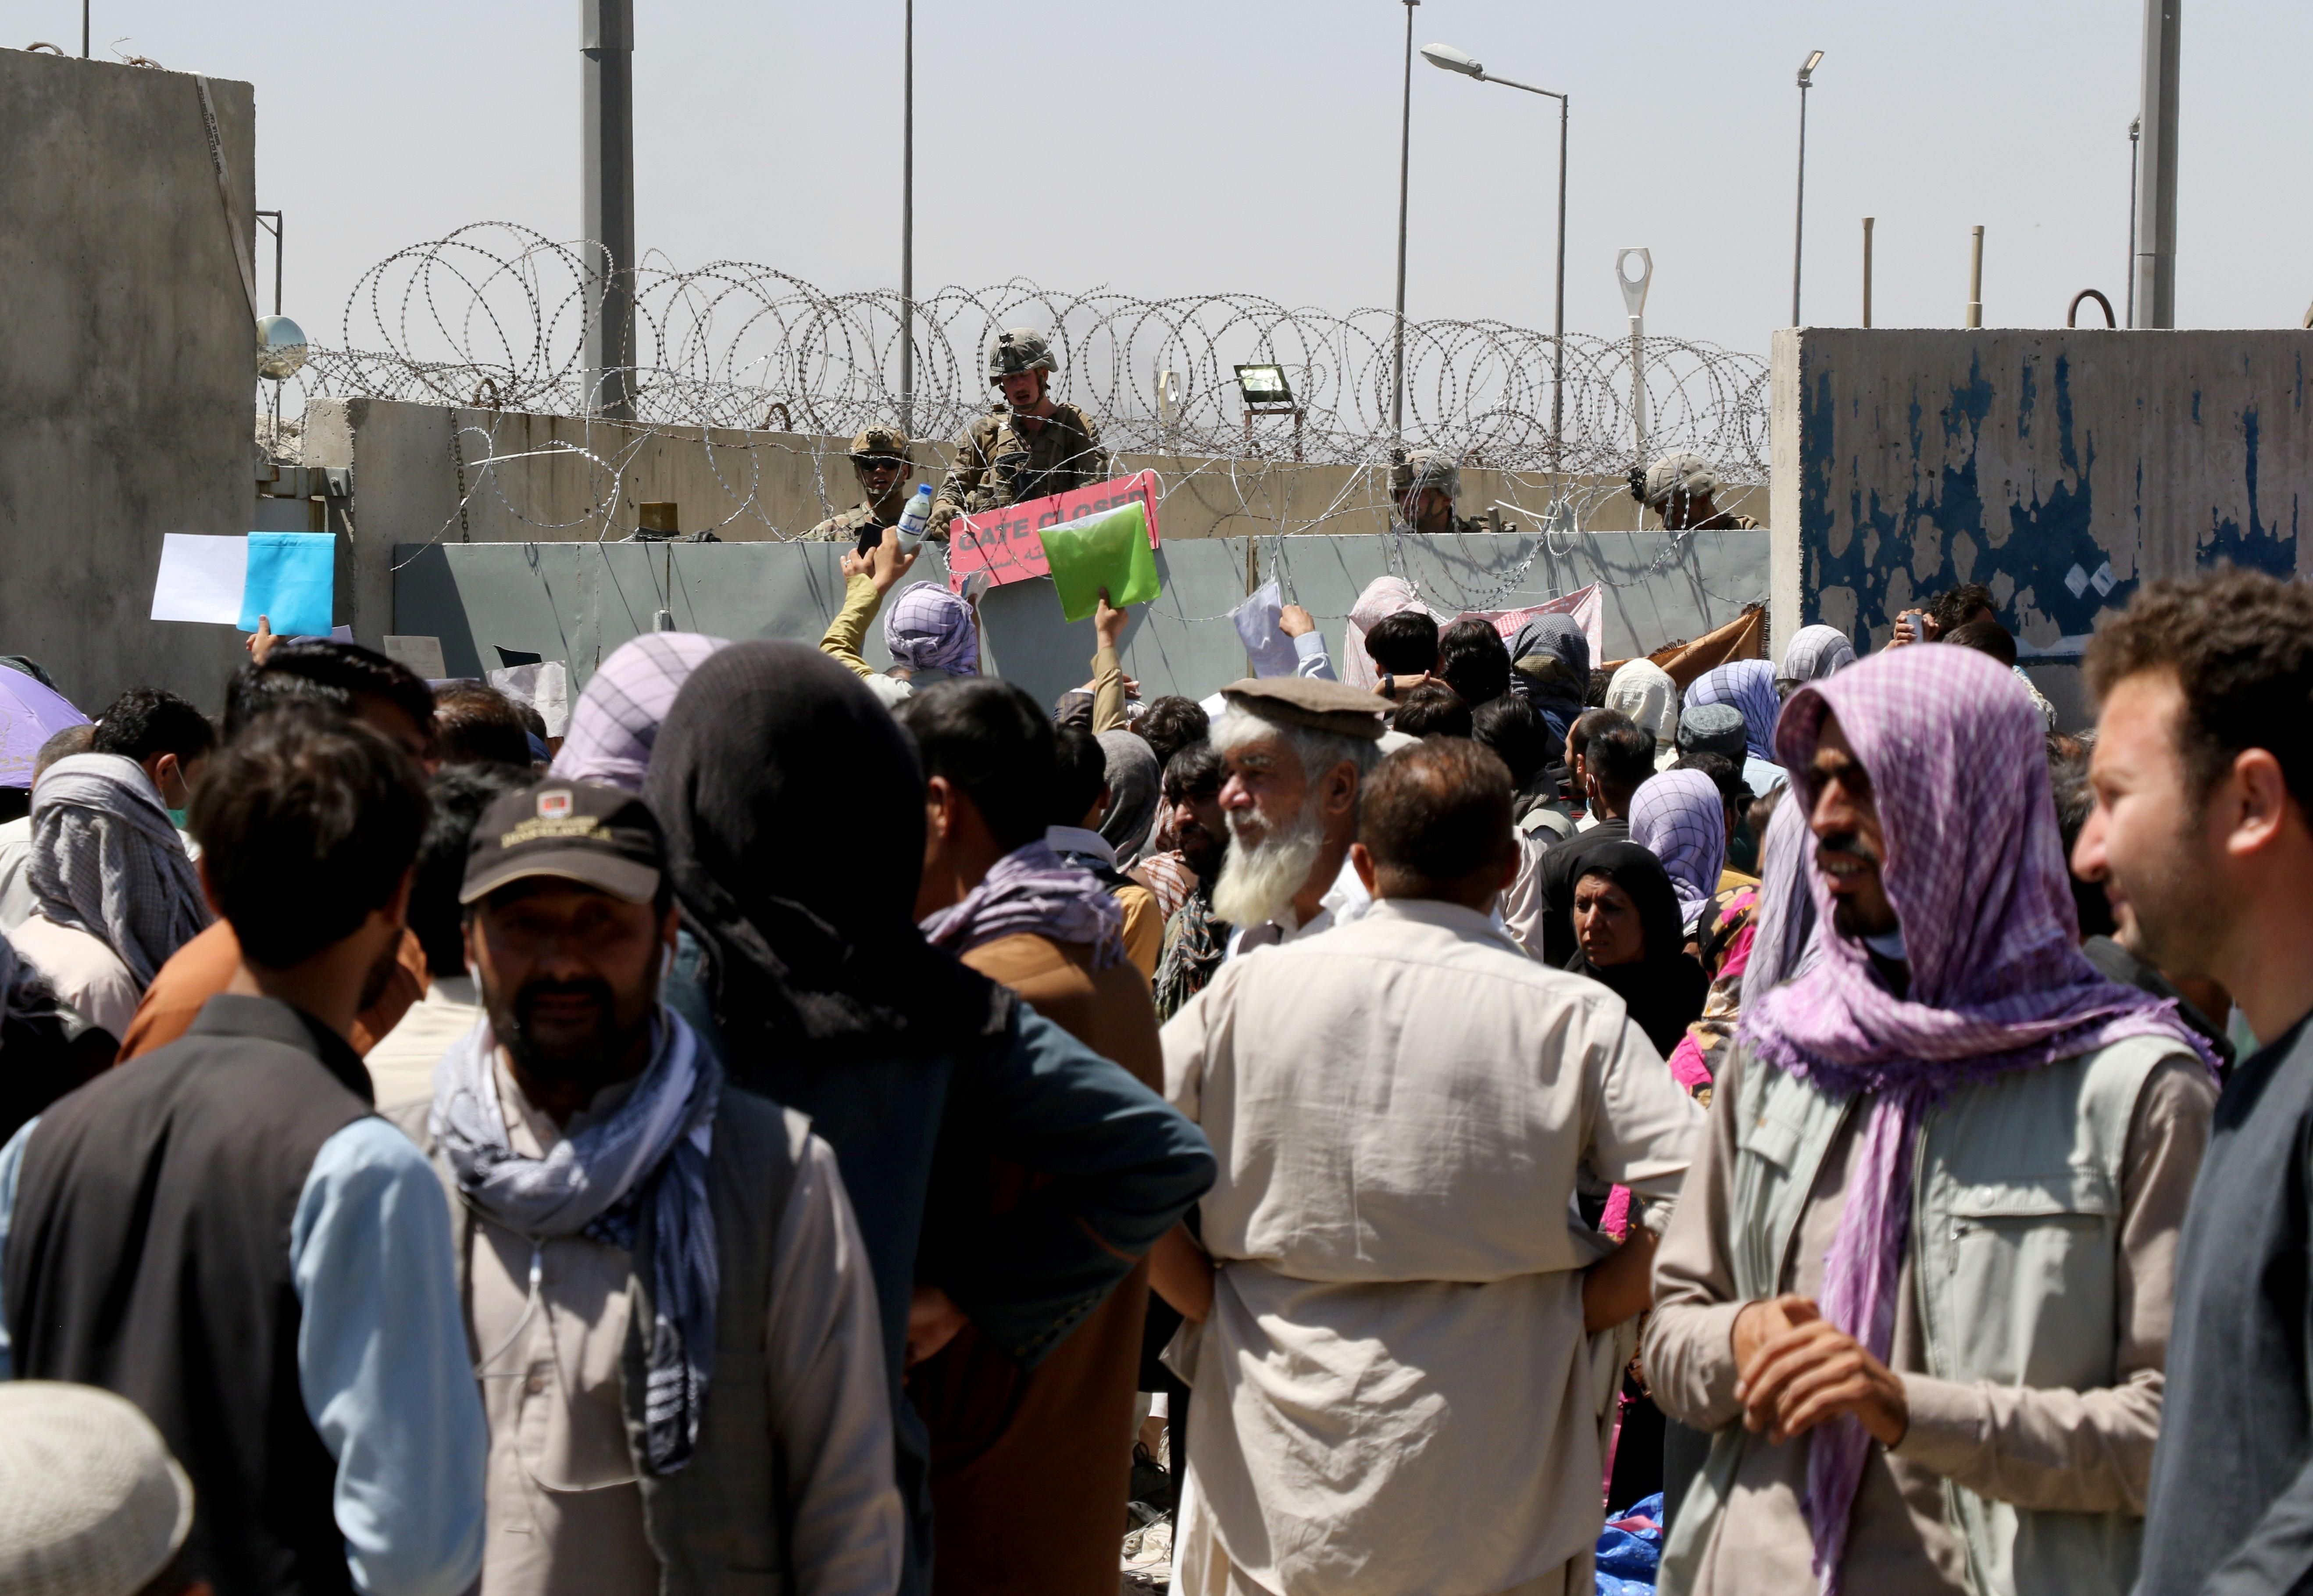 Crowds of people show their documents to U.S. troops outside the airport in Kabul, Afghanistan August 26, 2021.